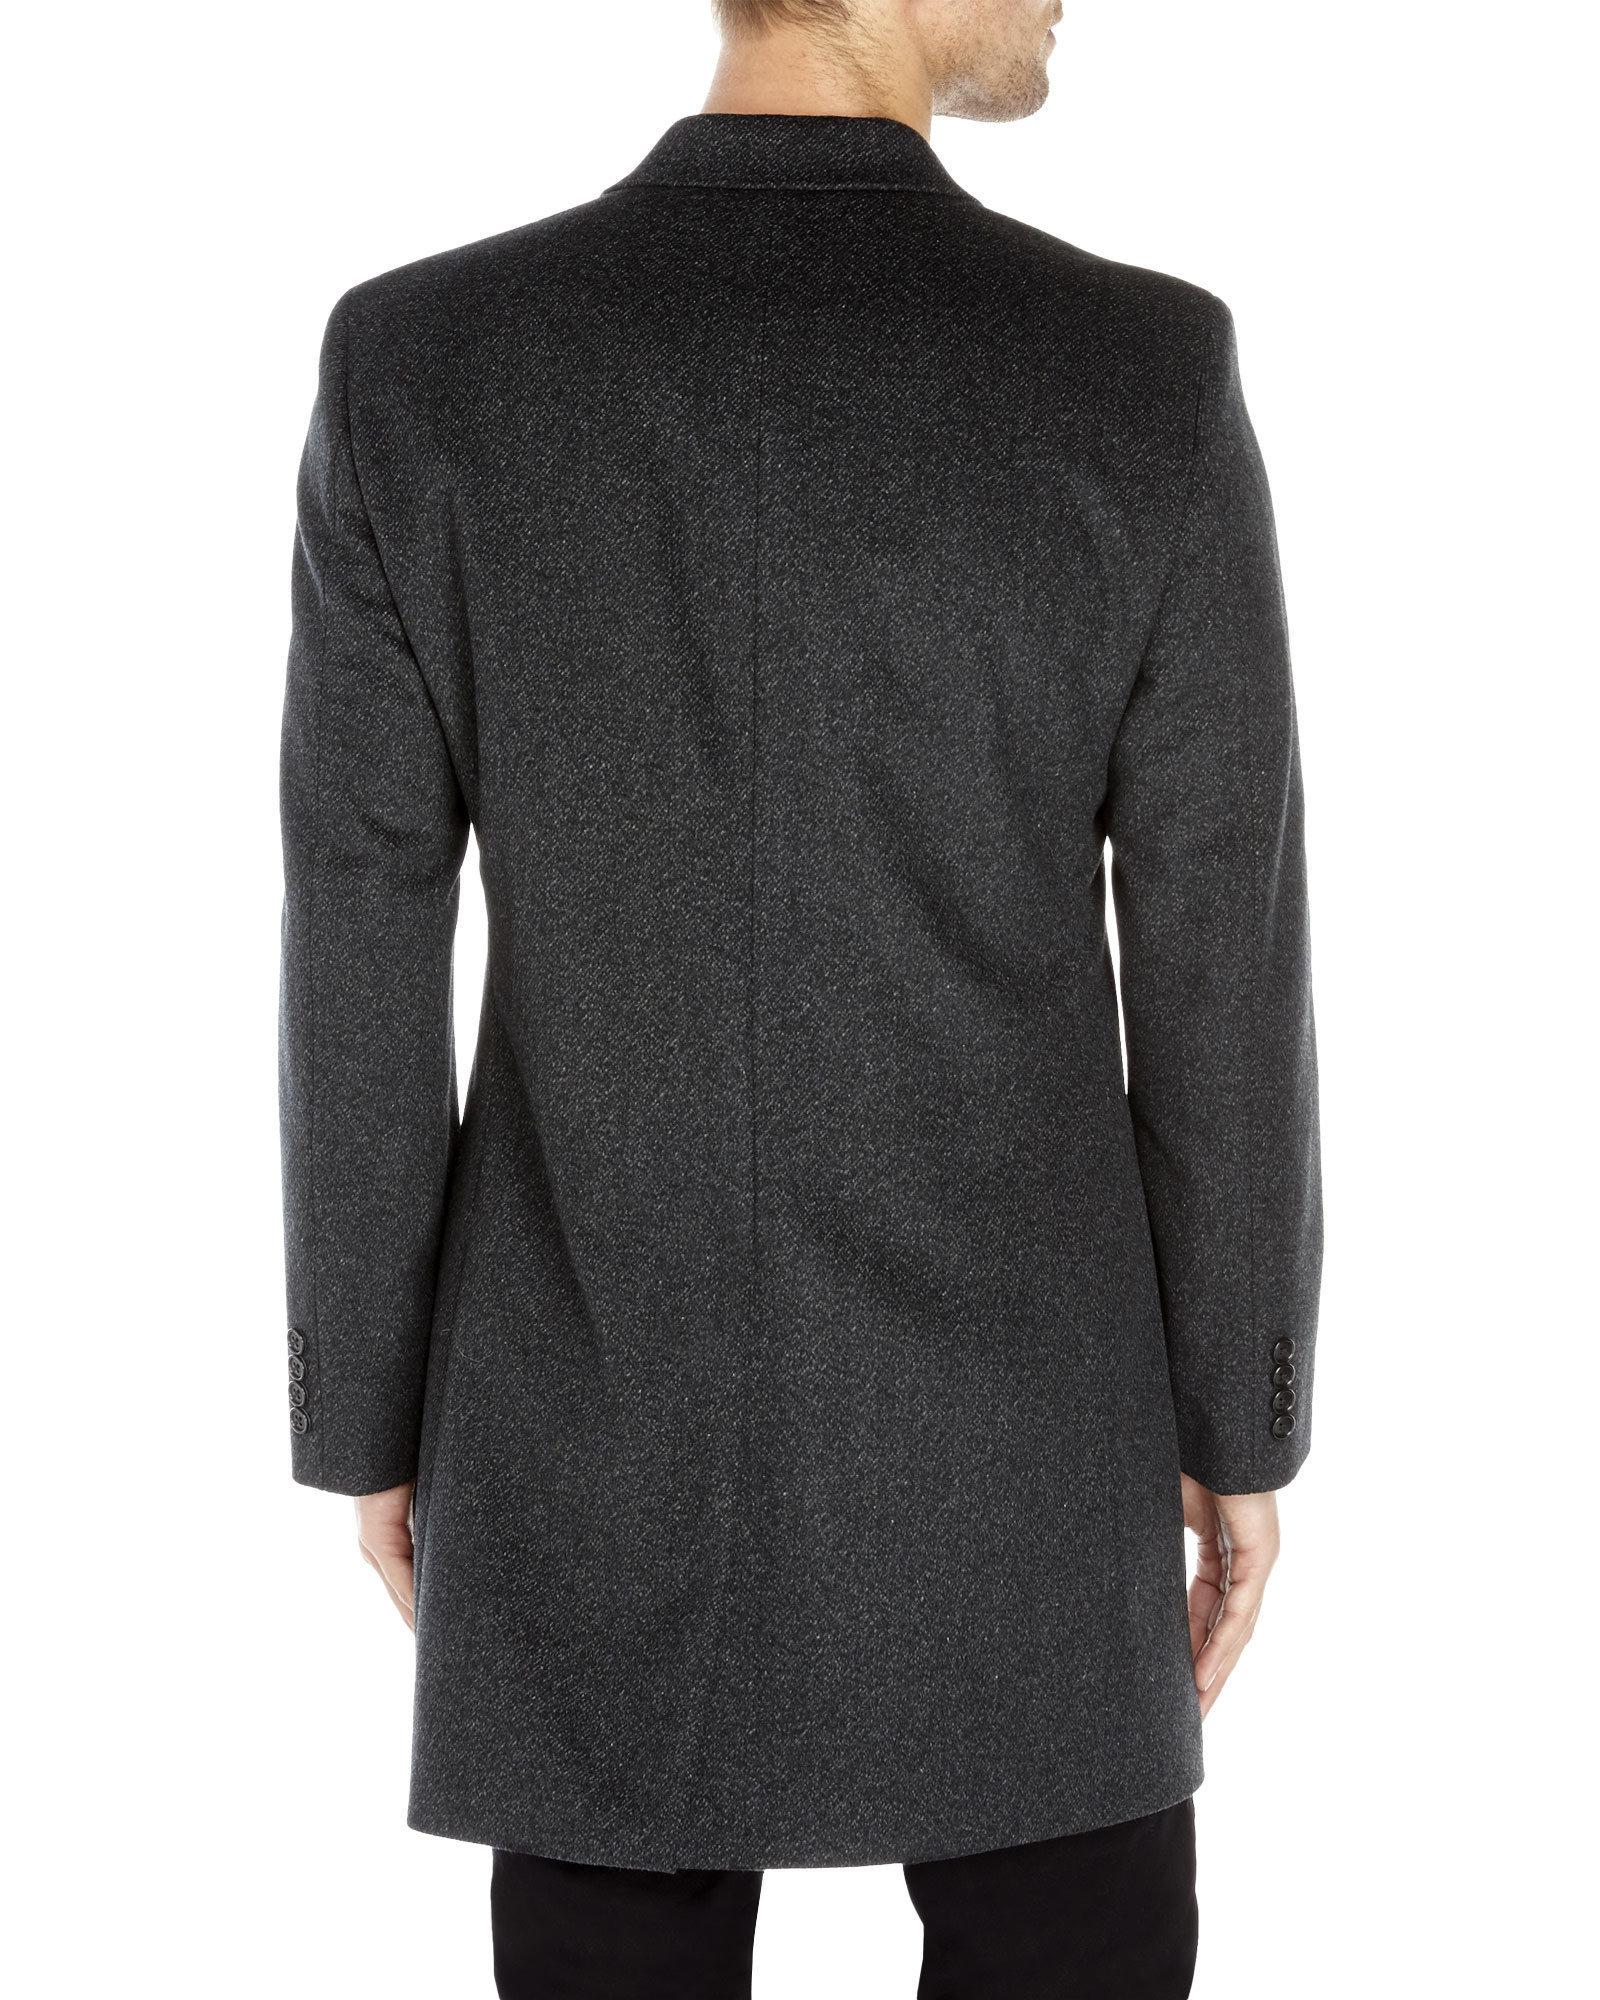 Lyst - Kenneth Cole Charcoal Hidden Button Overcoat in Gray for Men